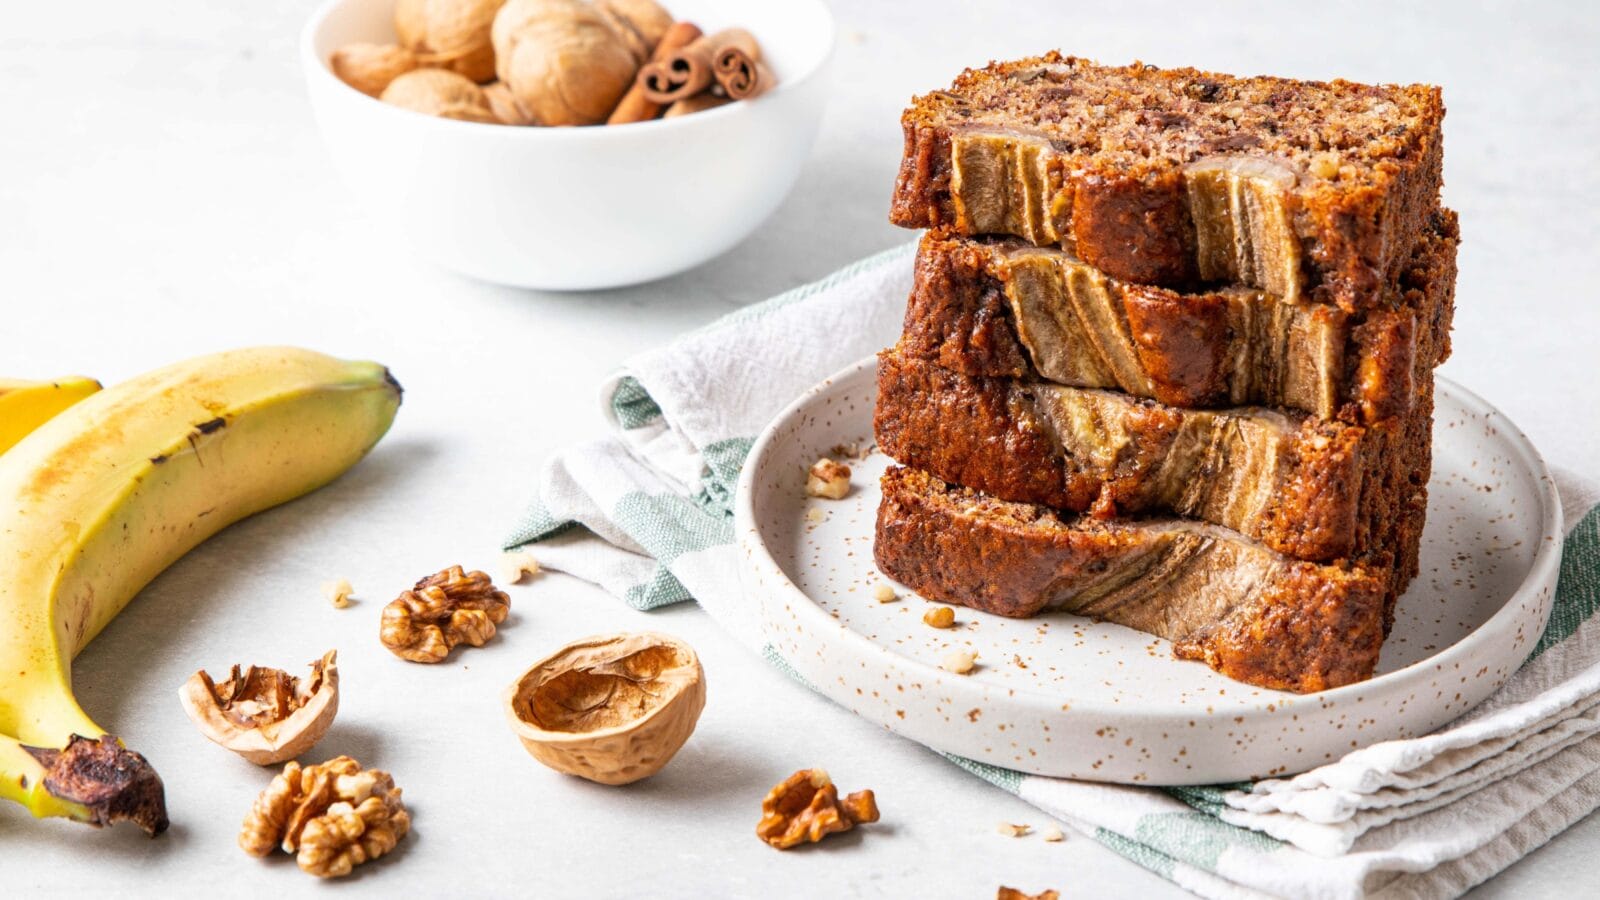 Pieces of american homemade sliced banana bread with chopped walnuts, chocolate and cinnamon.